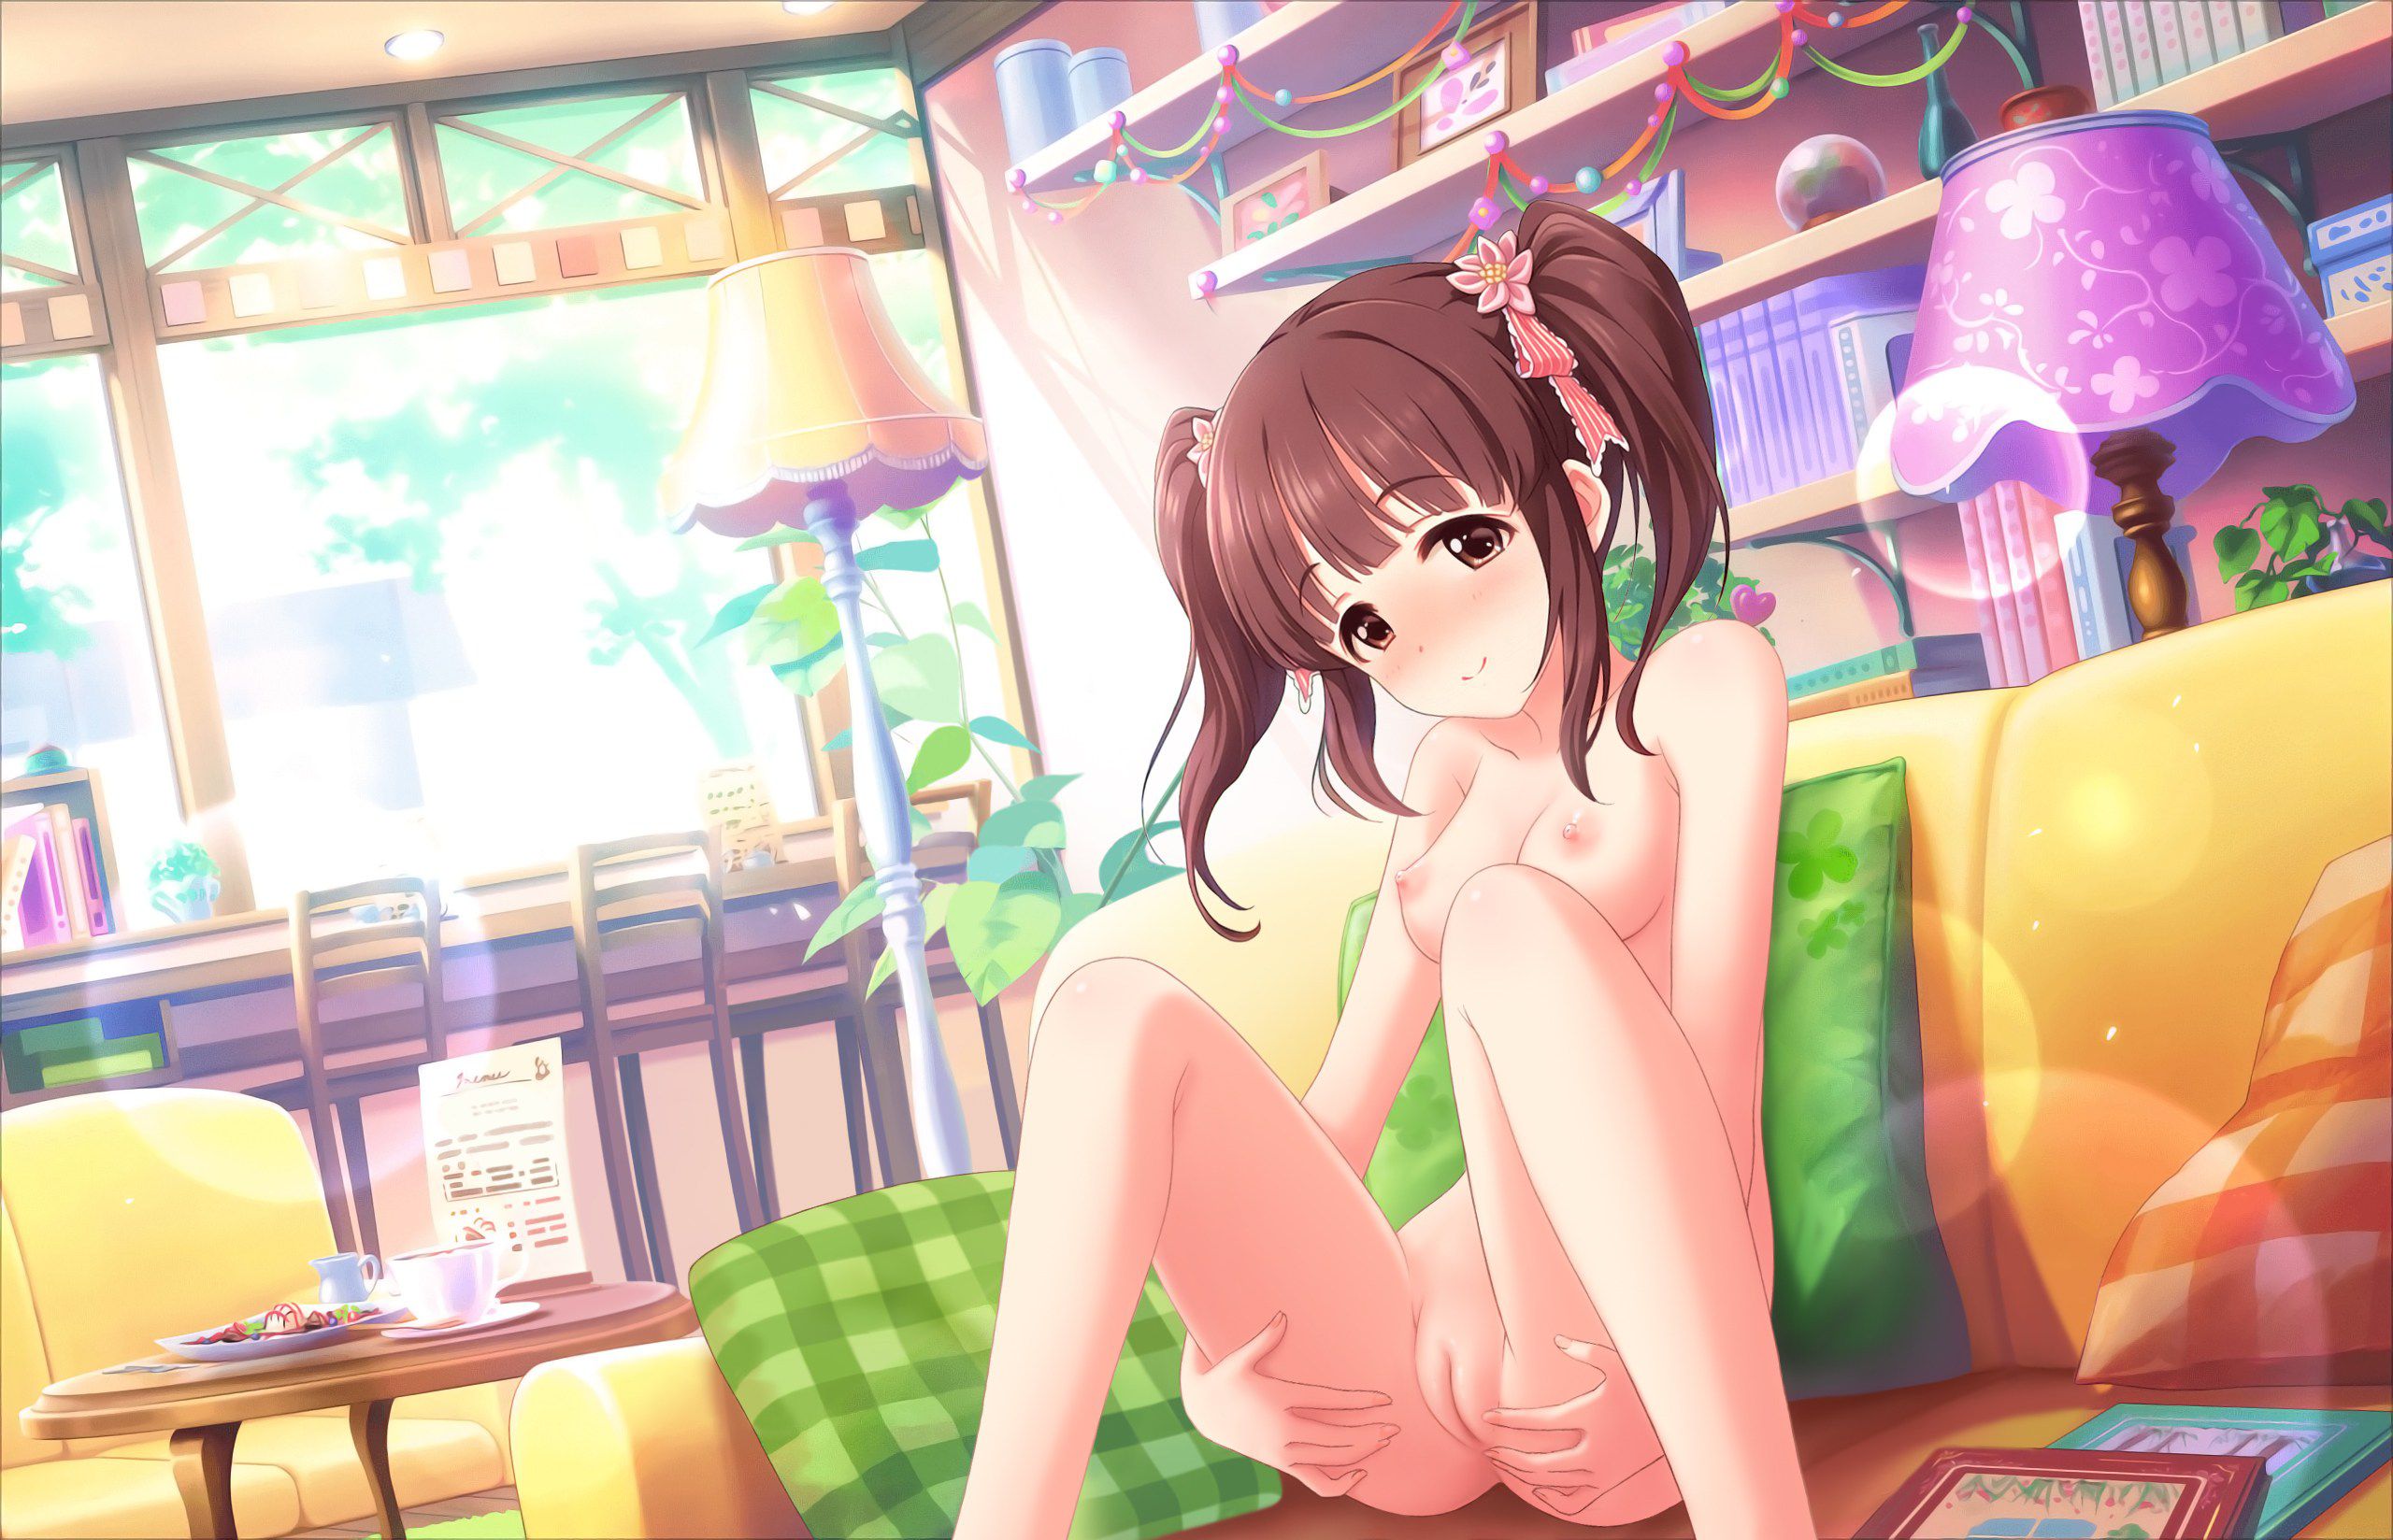 [Idolmaster] of the eye mass stripping of Photoshop and erotic Photoshop is wonderful that 43 14